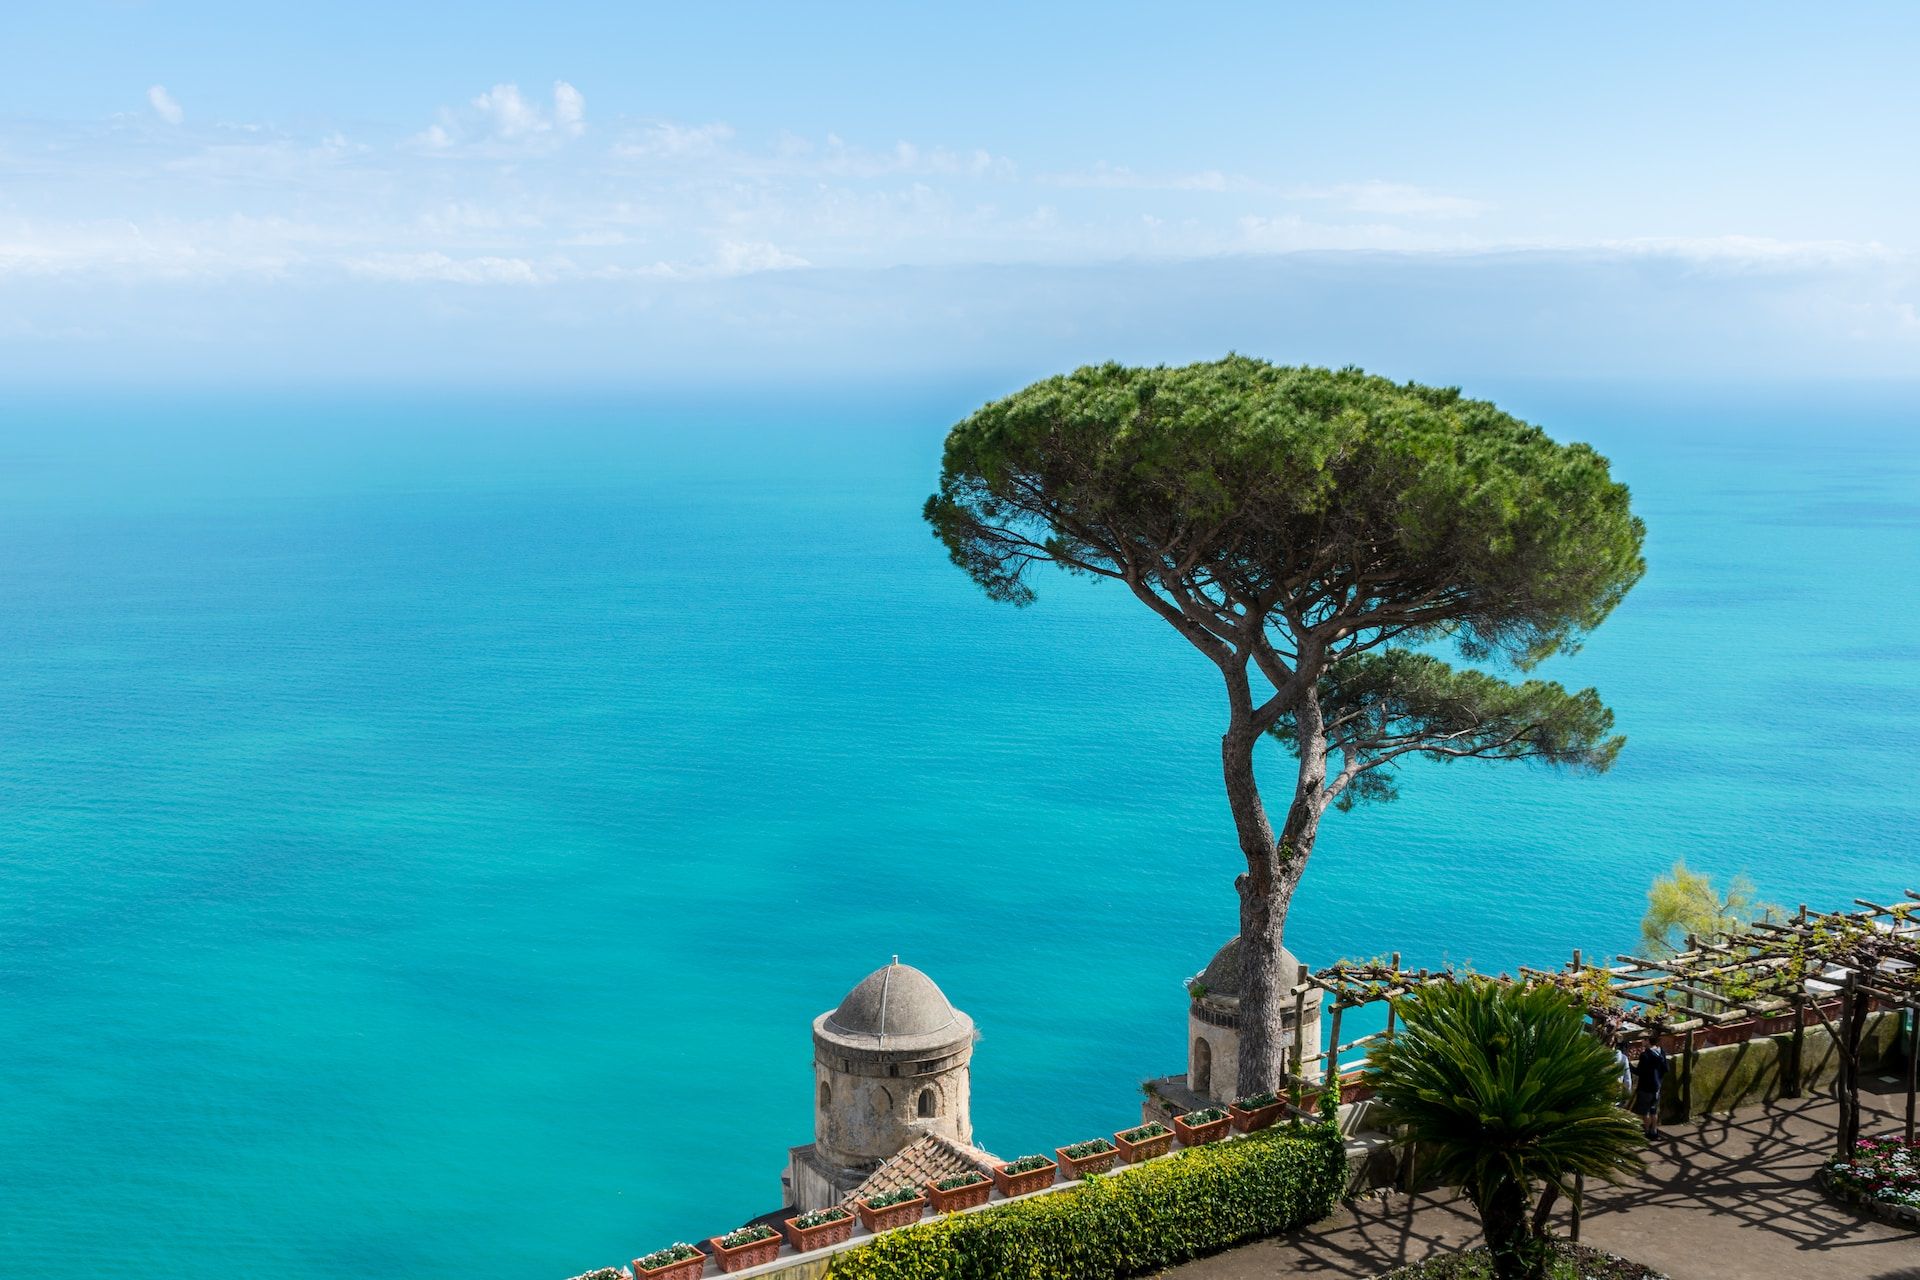 Trees in front of blue-green water on the Amalfi Coast